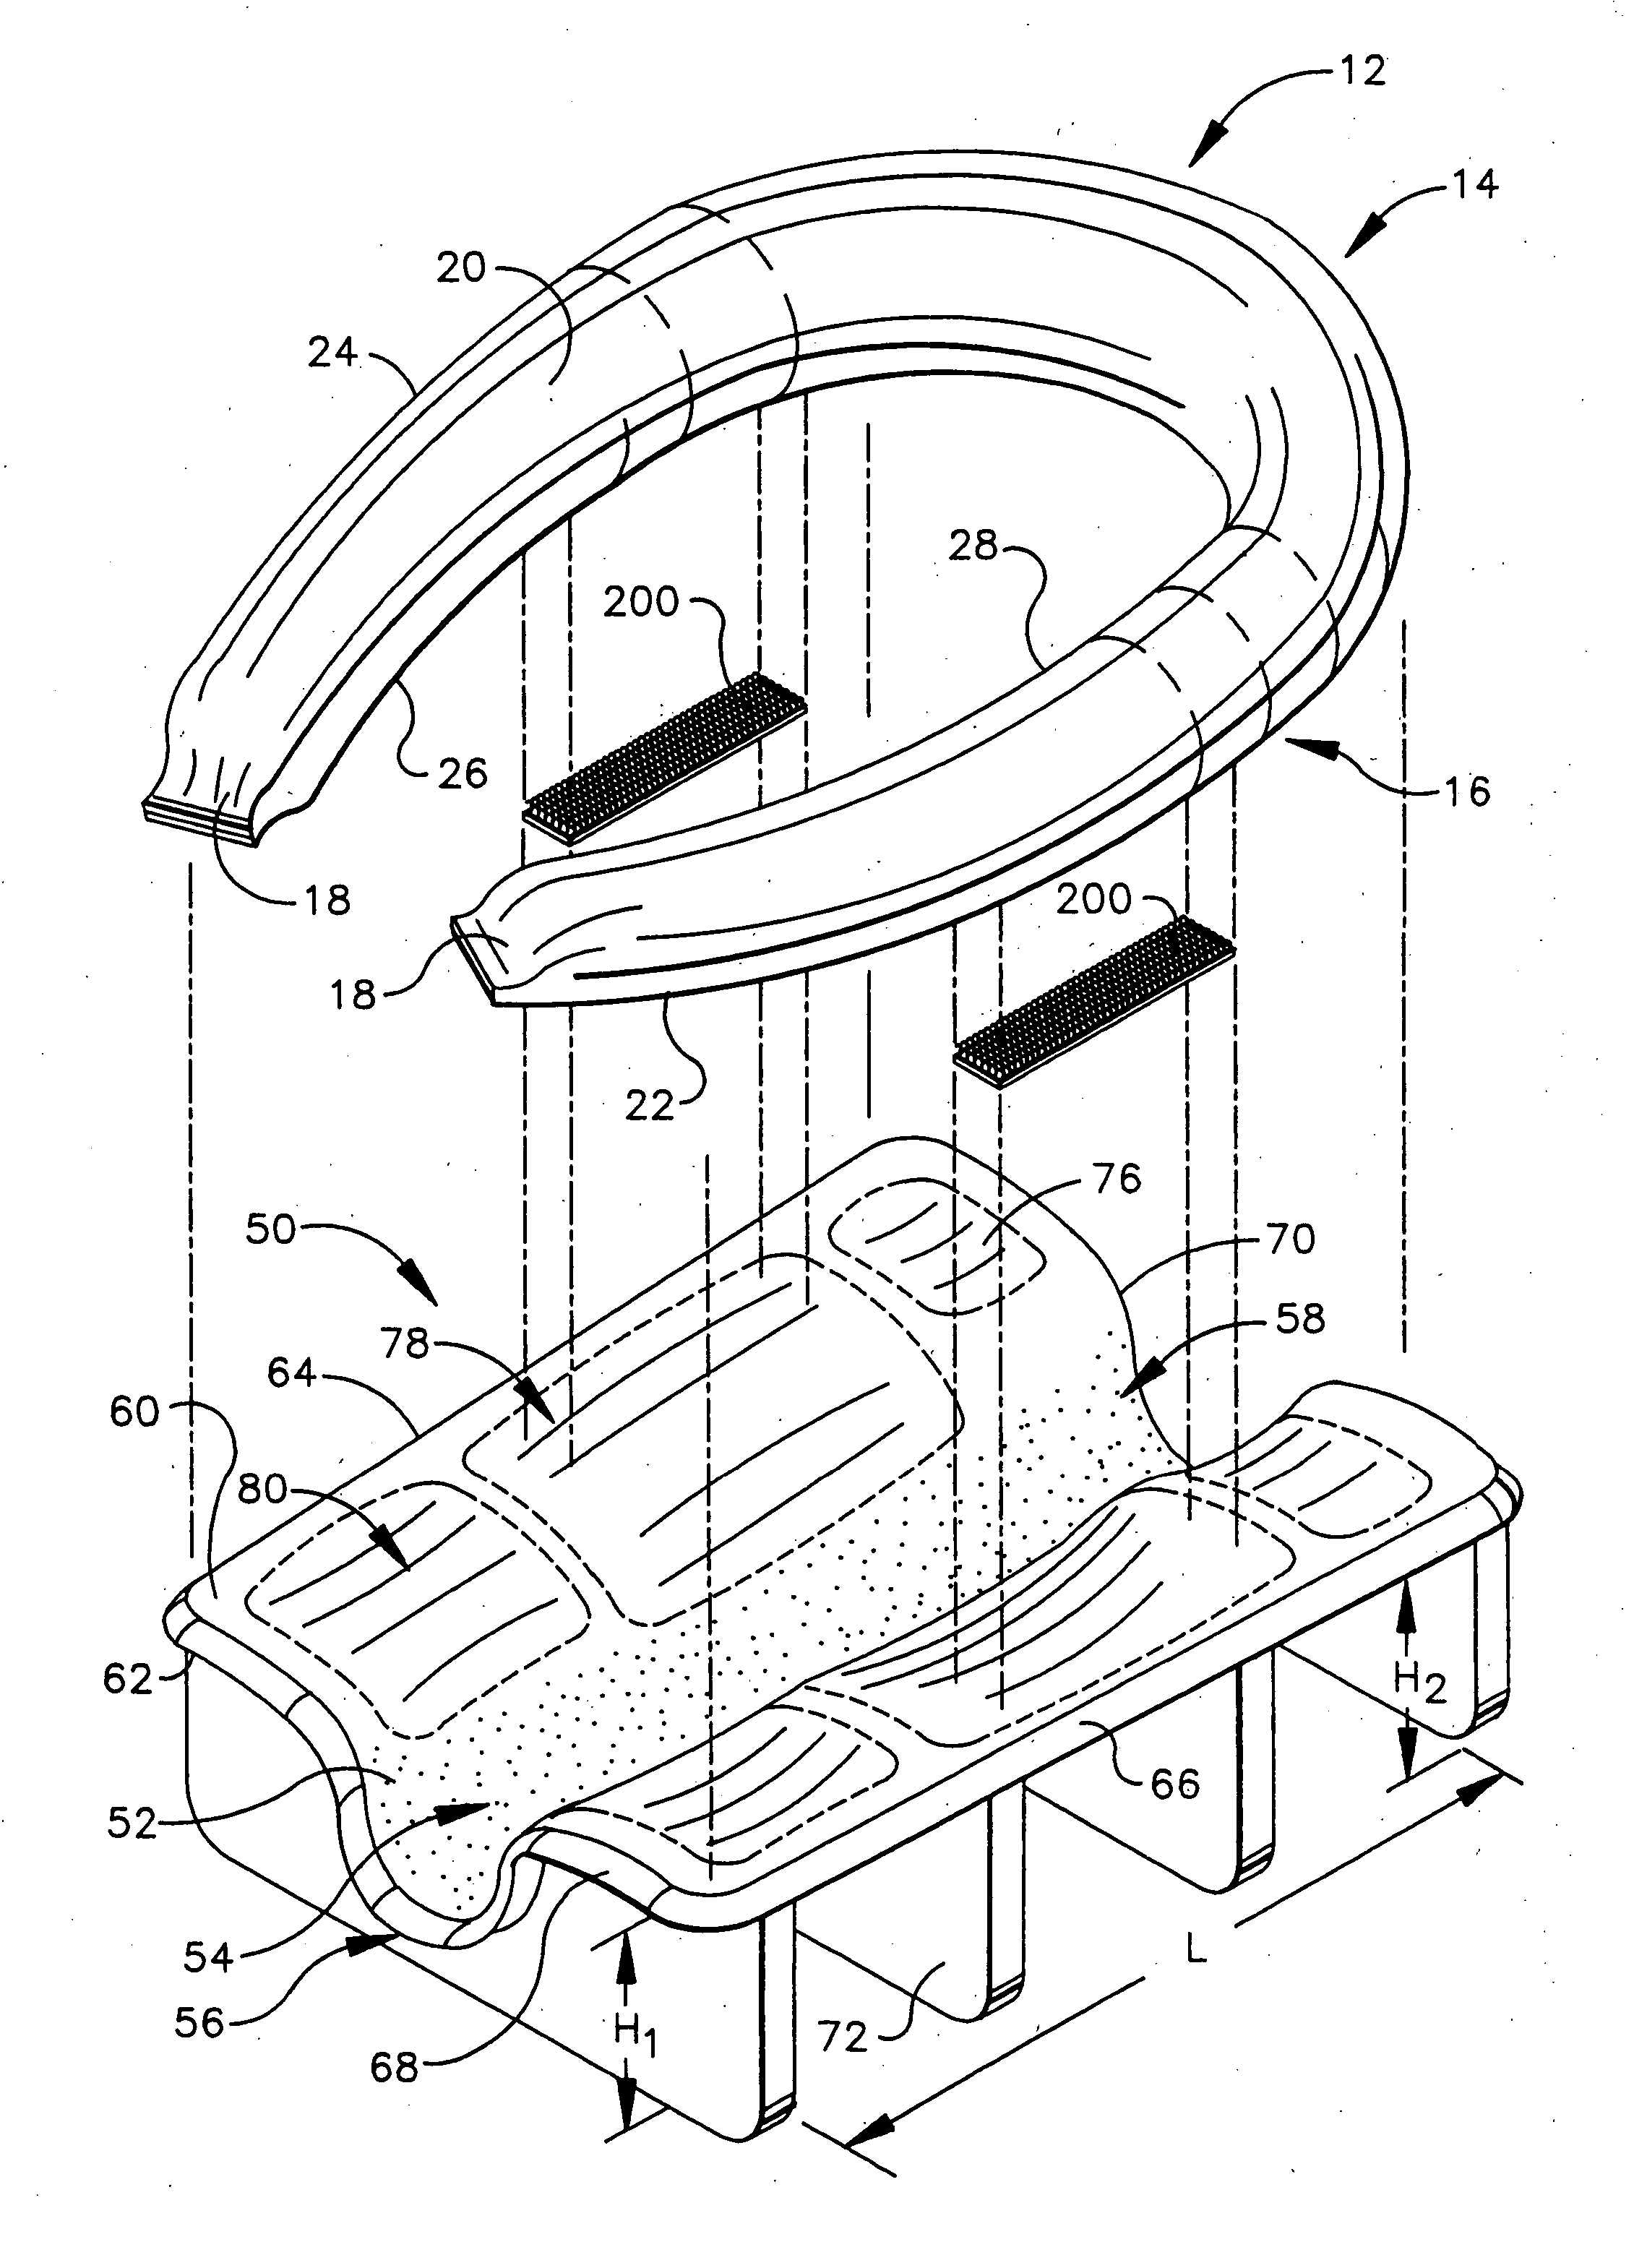 Head support device for use when lying in the prone position